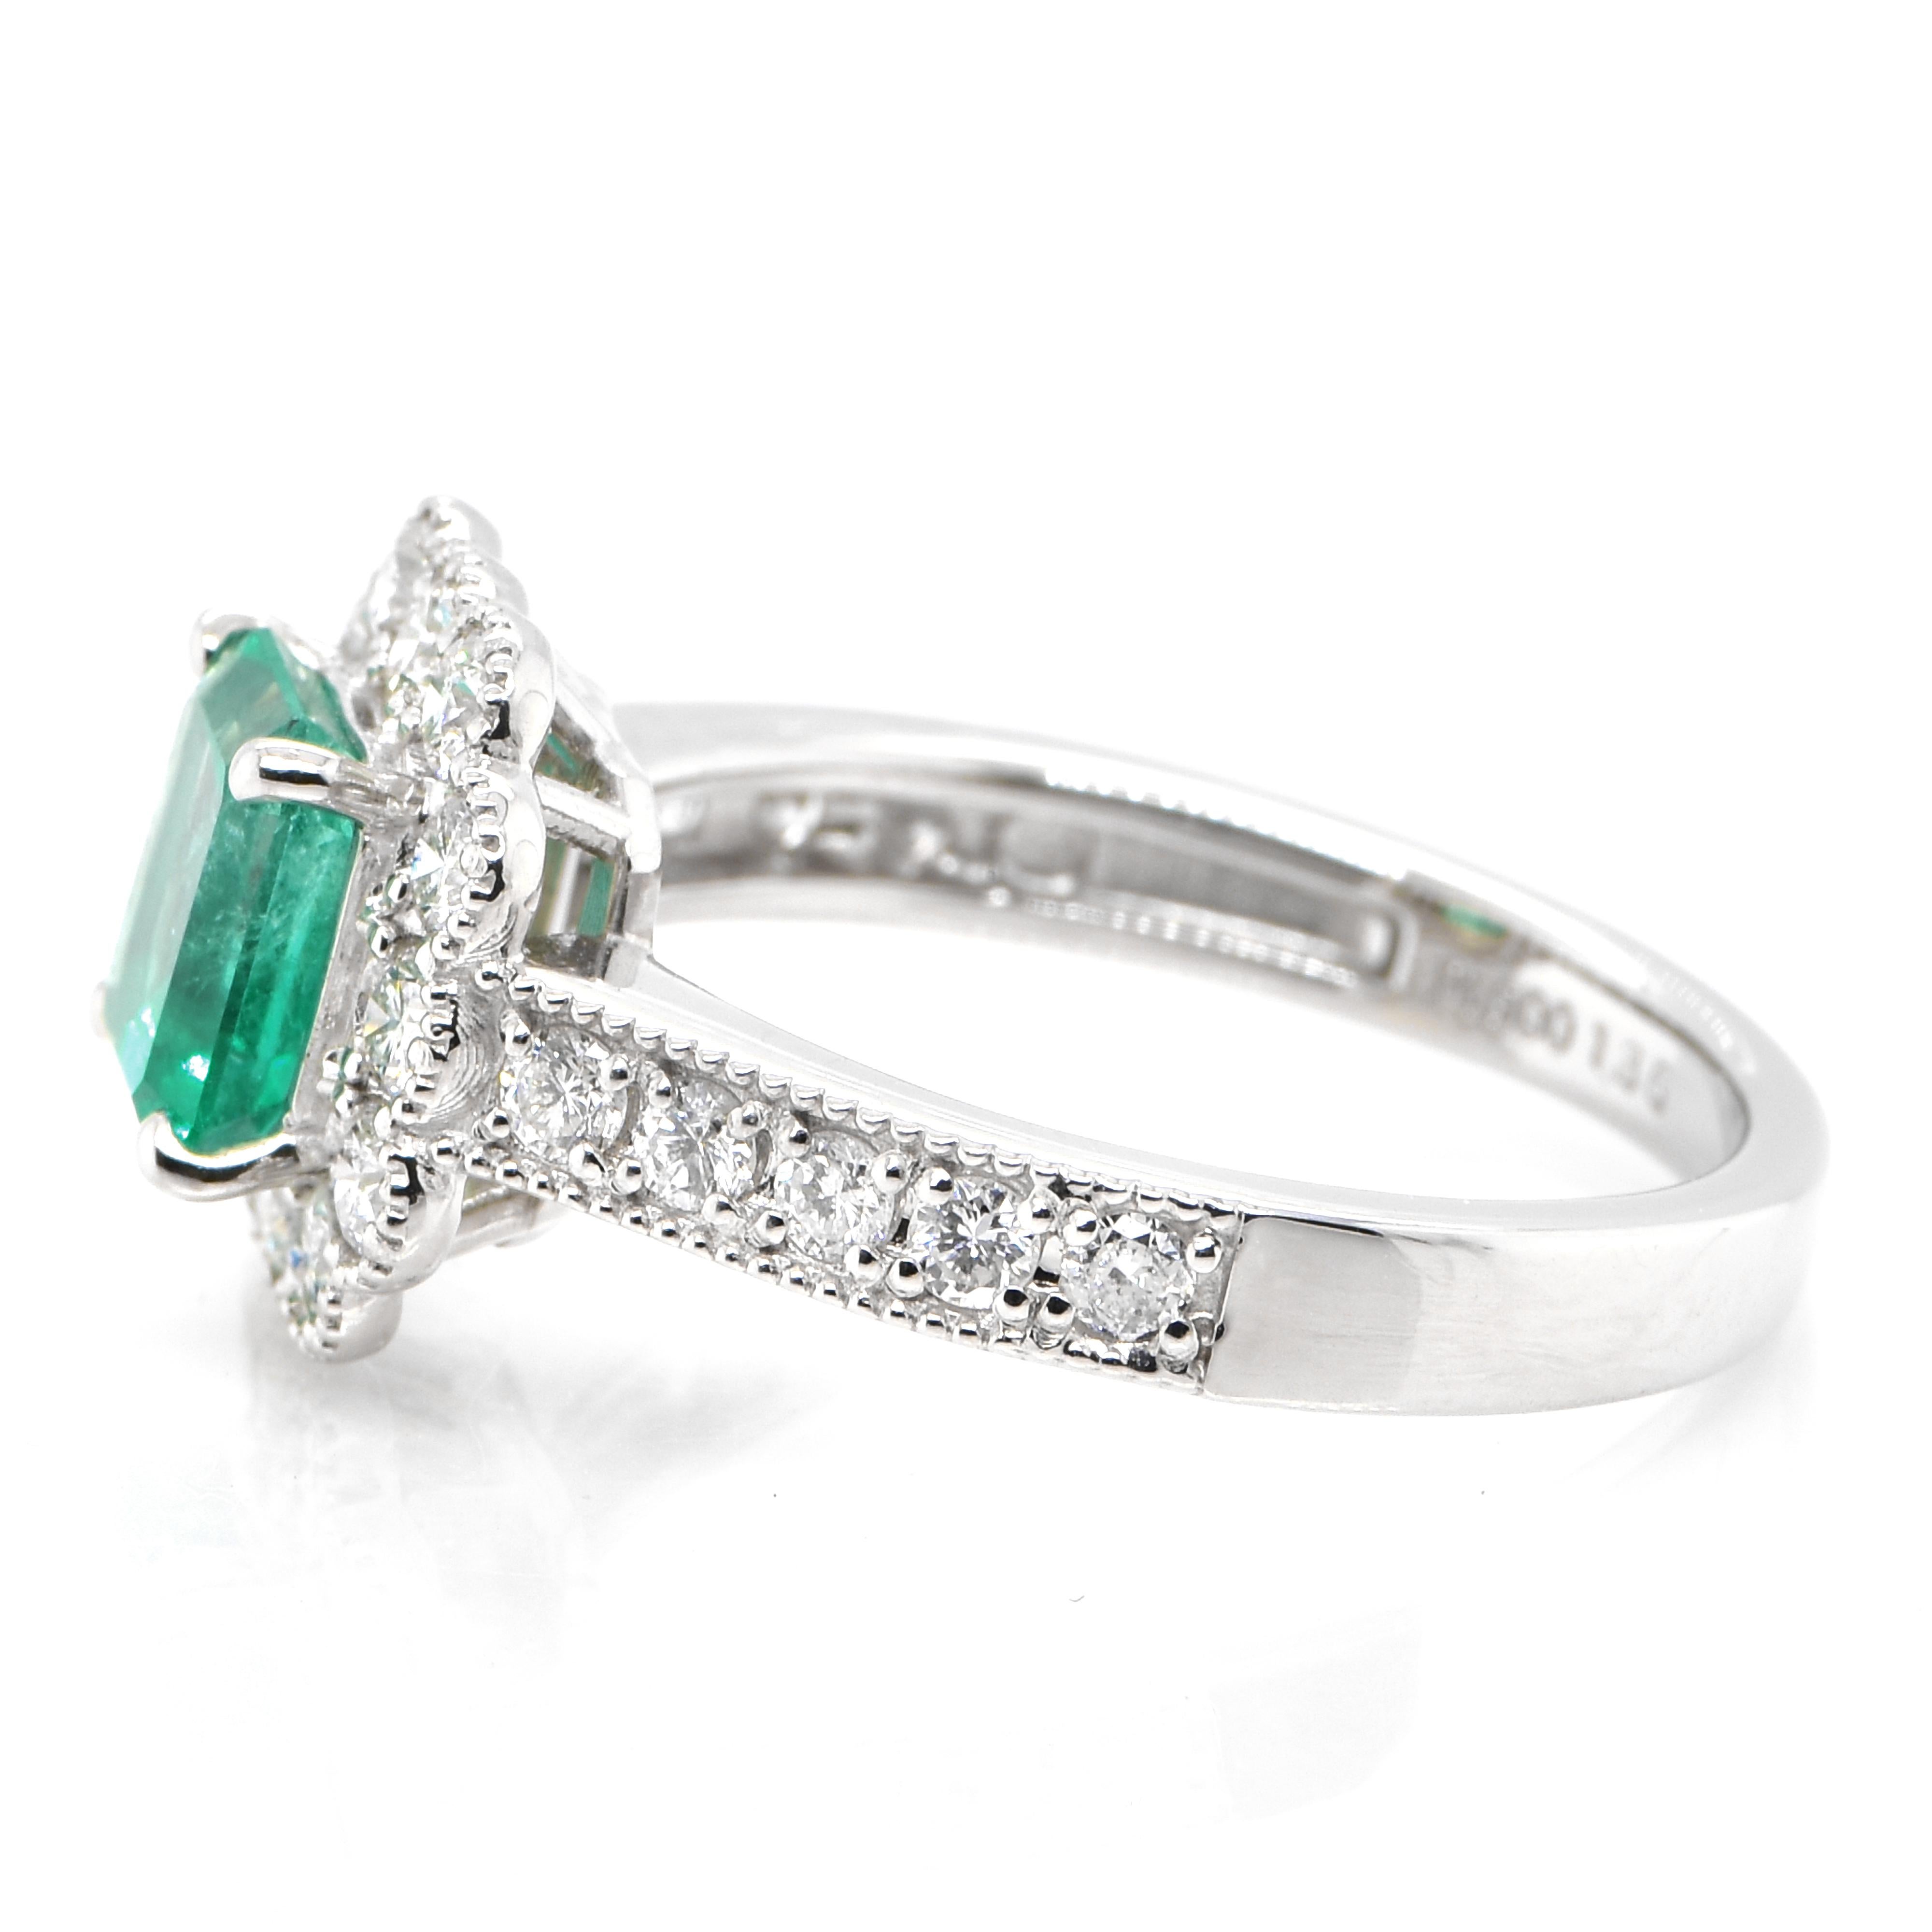 Emerald Cut 1.36 Carat Natural Colombian Emerald and Diamond Halo Ring set in Platinum For Sale